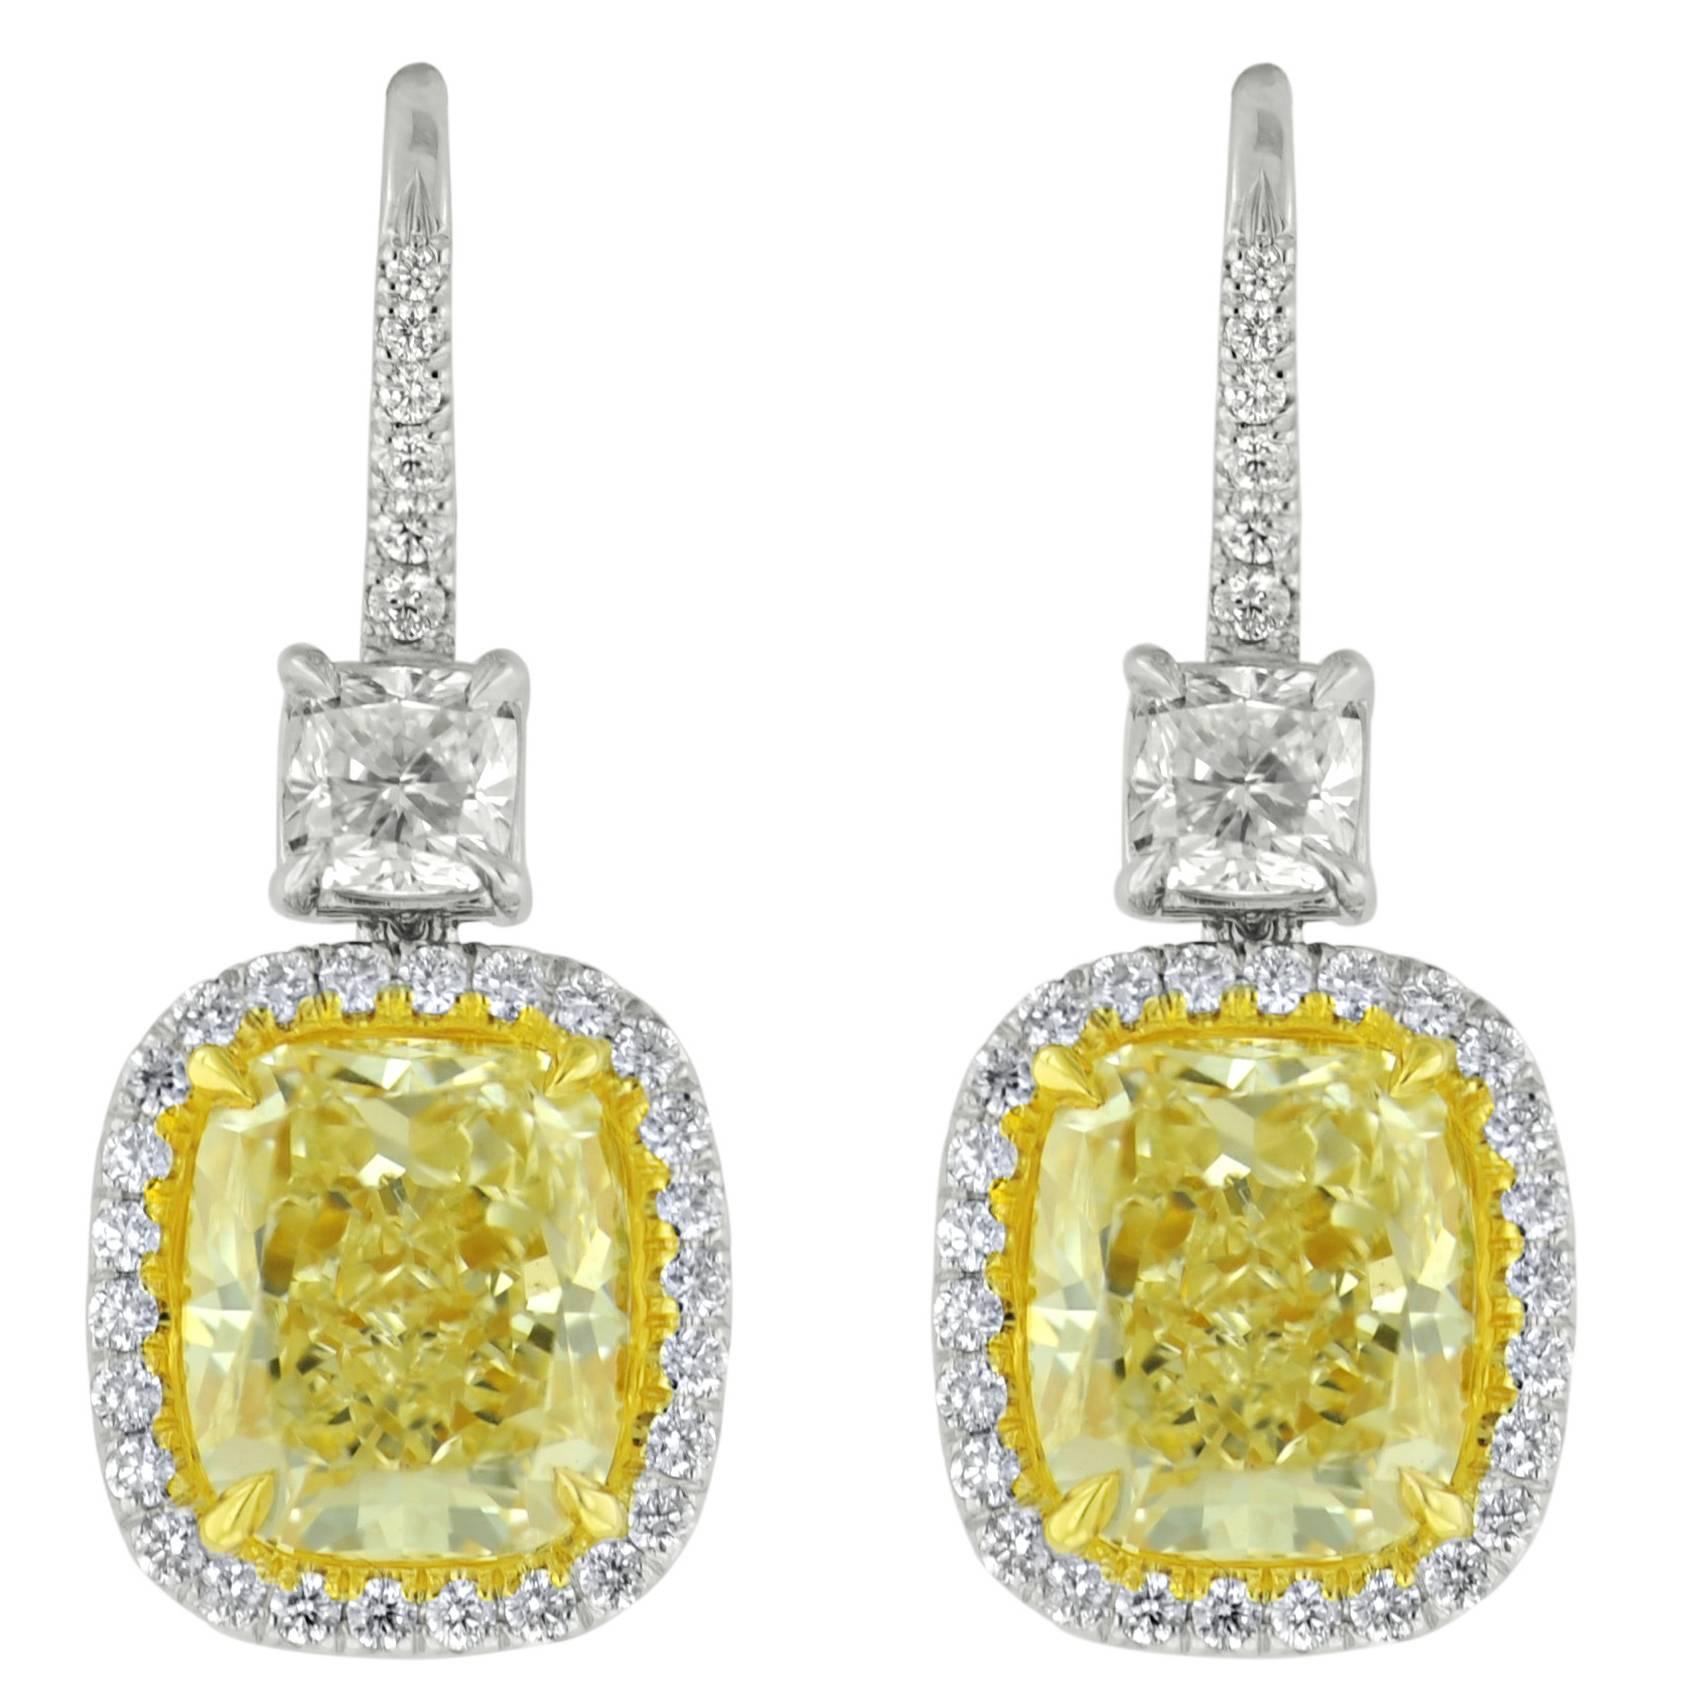 8.22 Carat Canary Yellow Diamond Earrings For Sale